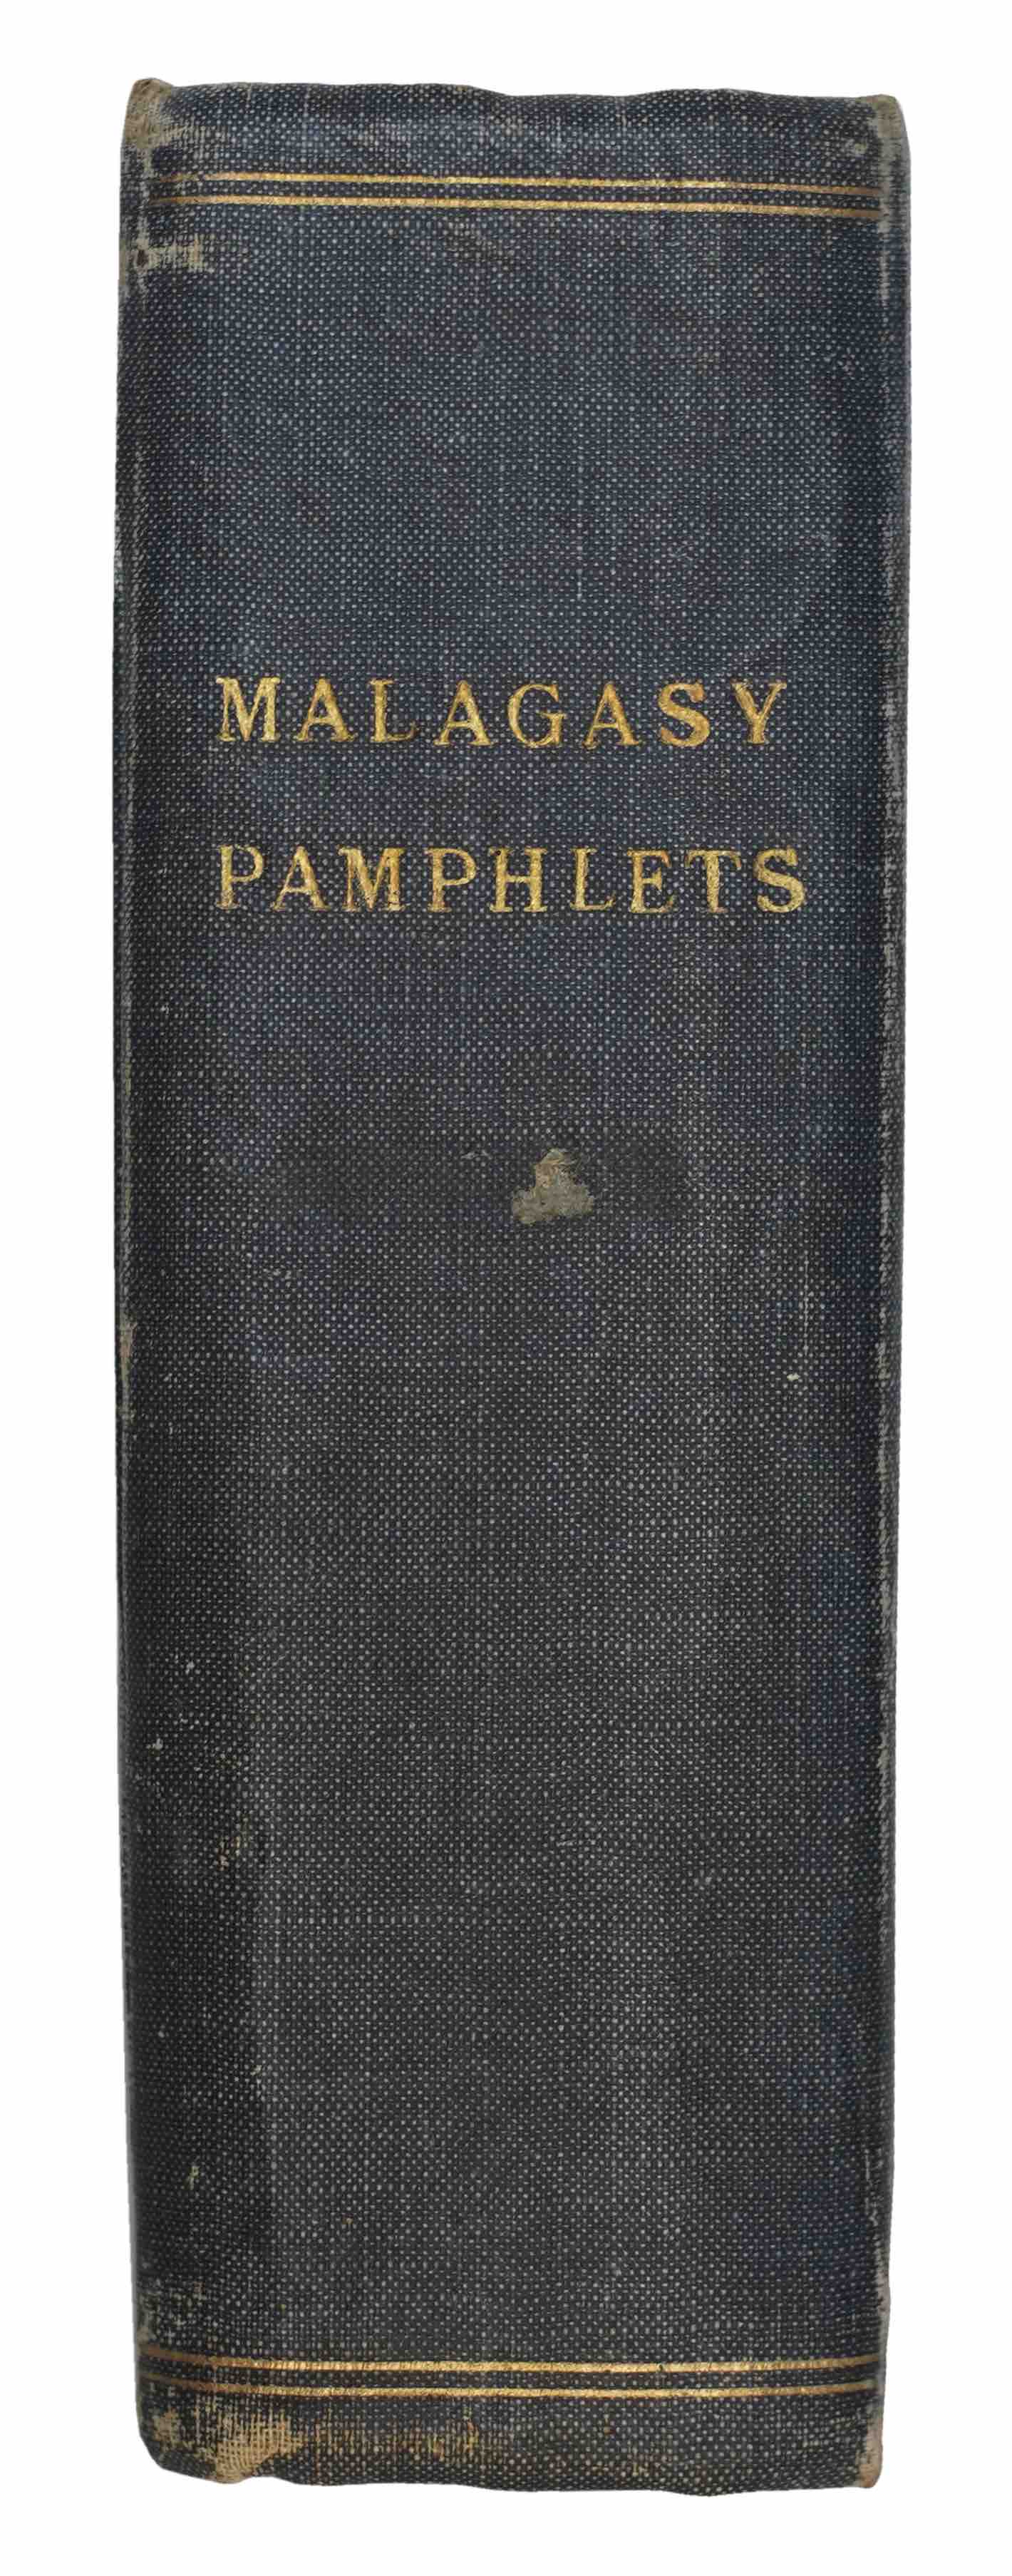 [MALAGASY] - Malagasy pamphlets [Title on spine]. Twenty tracts. Tananarive, London Missionary Society, 1911-18.